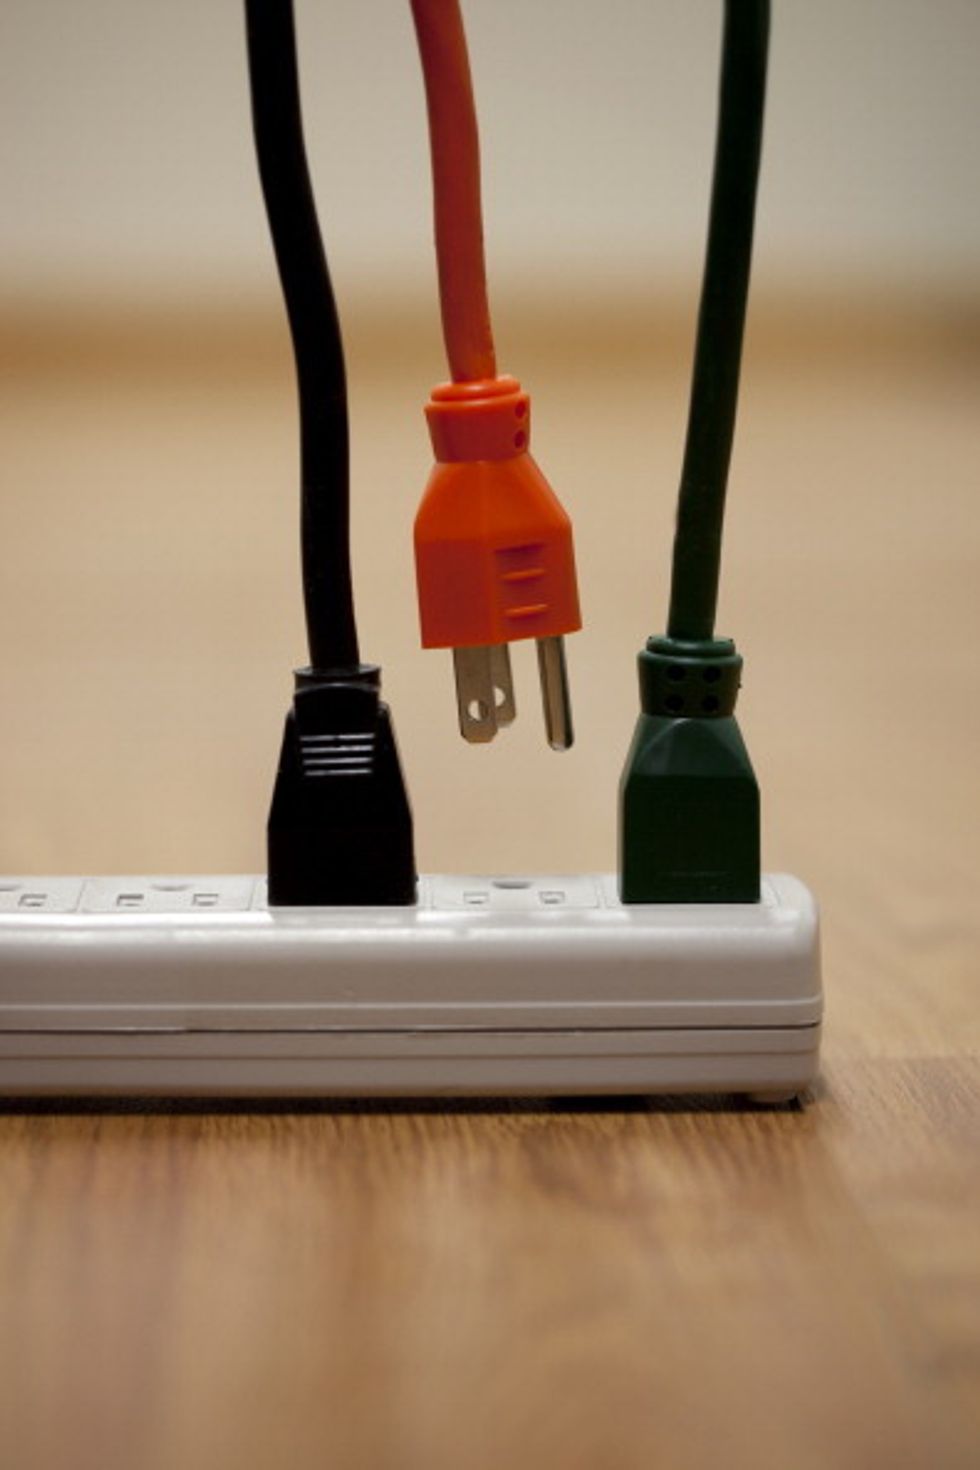 Here's An Extensive Study on Extension Cords, in Brief